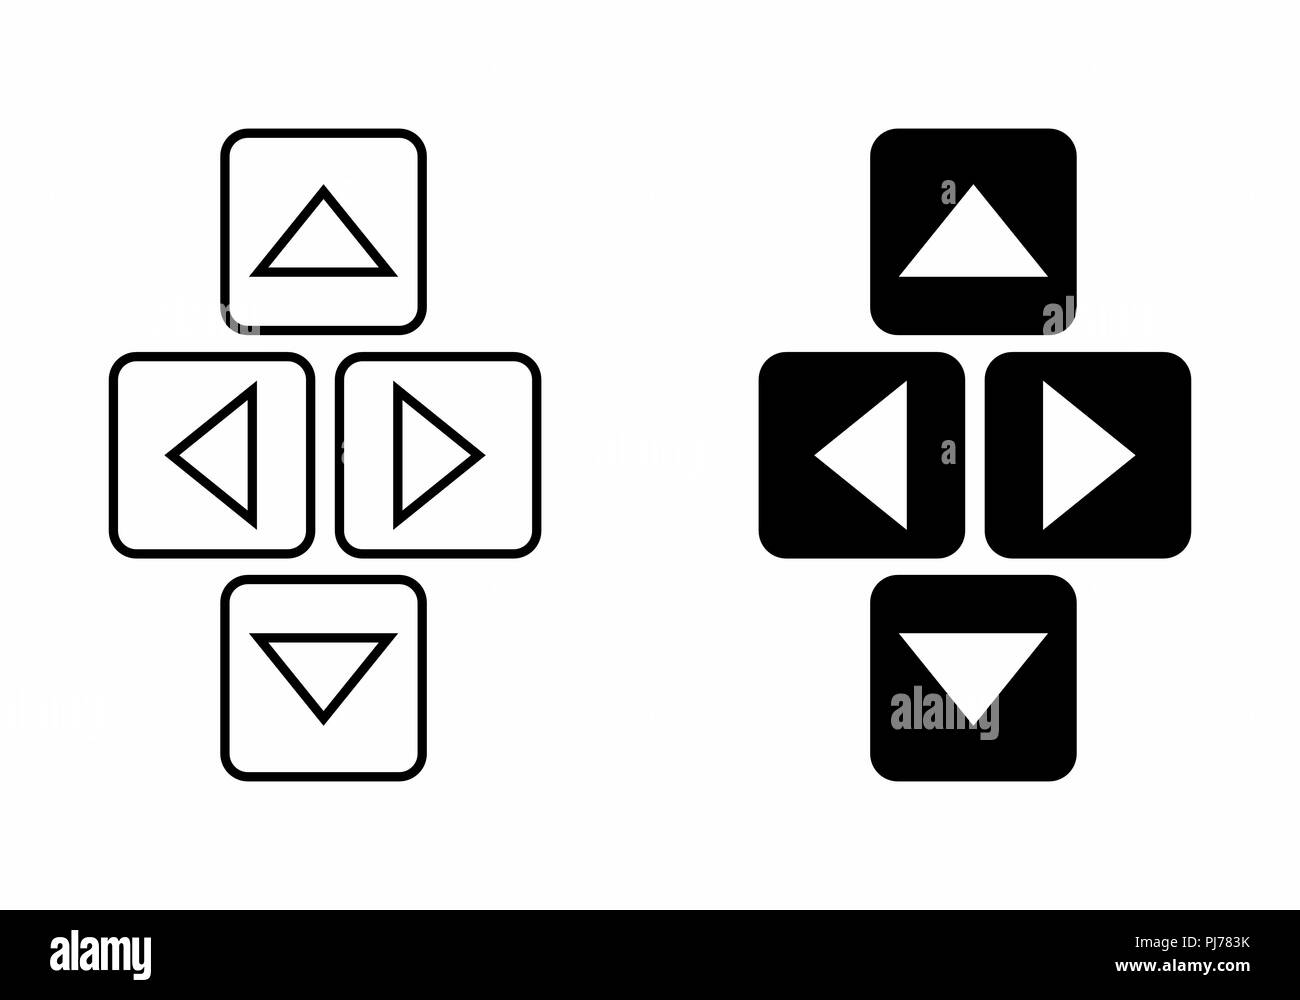 Illustration of directional buttons on white background Stock Vector